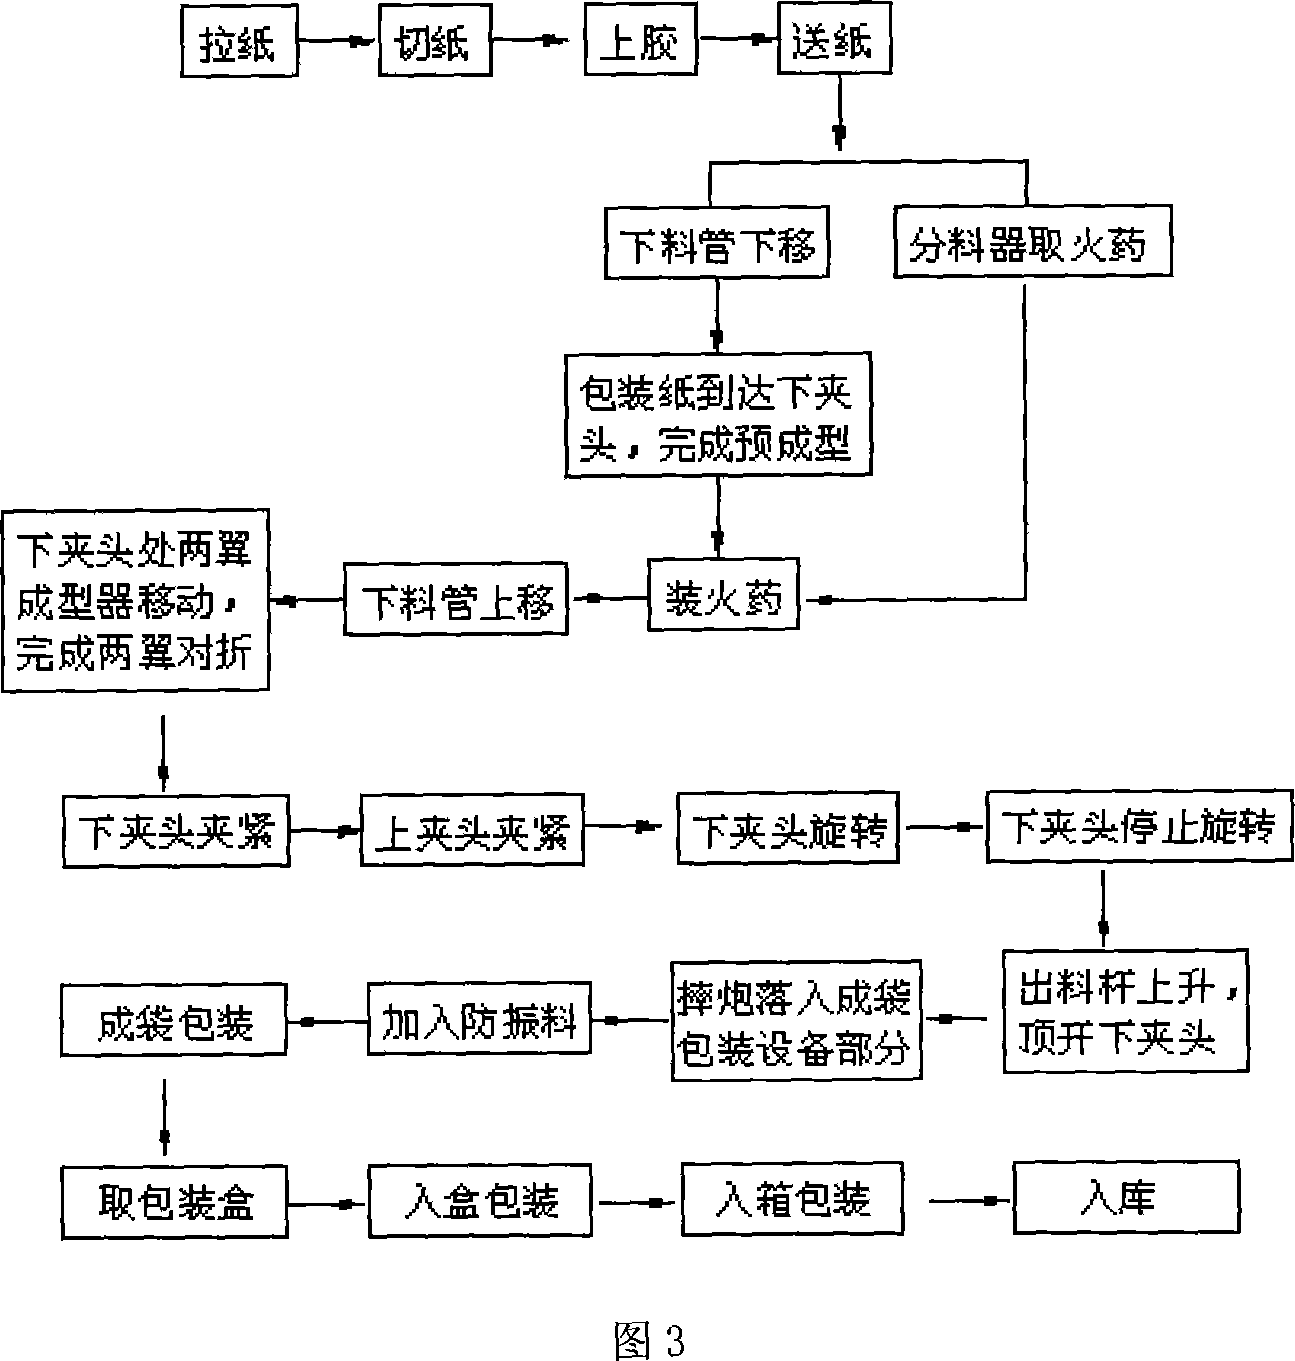 Automatically formed packaging method apparatus for throwing firecrackers